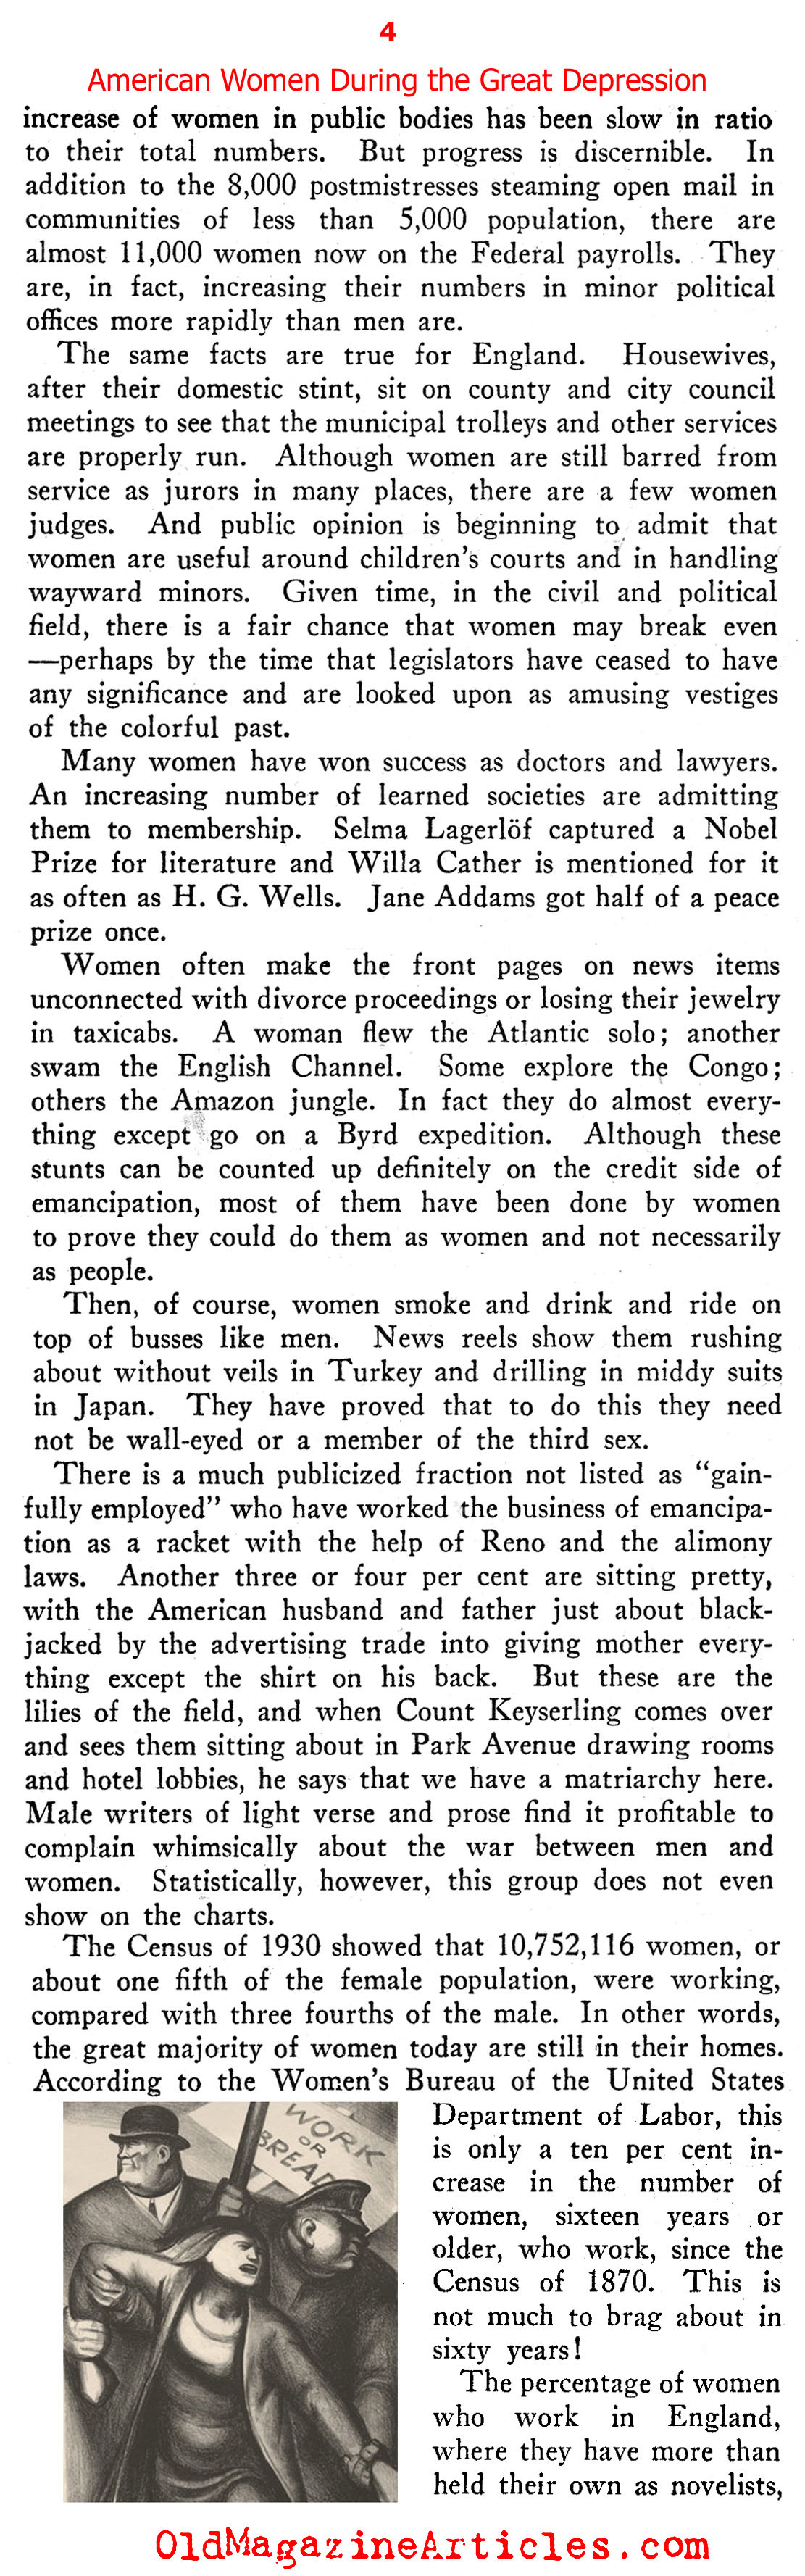 The Lot of Women in the Great Depression (New Outlook Magazine, 1934)